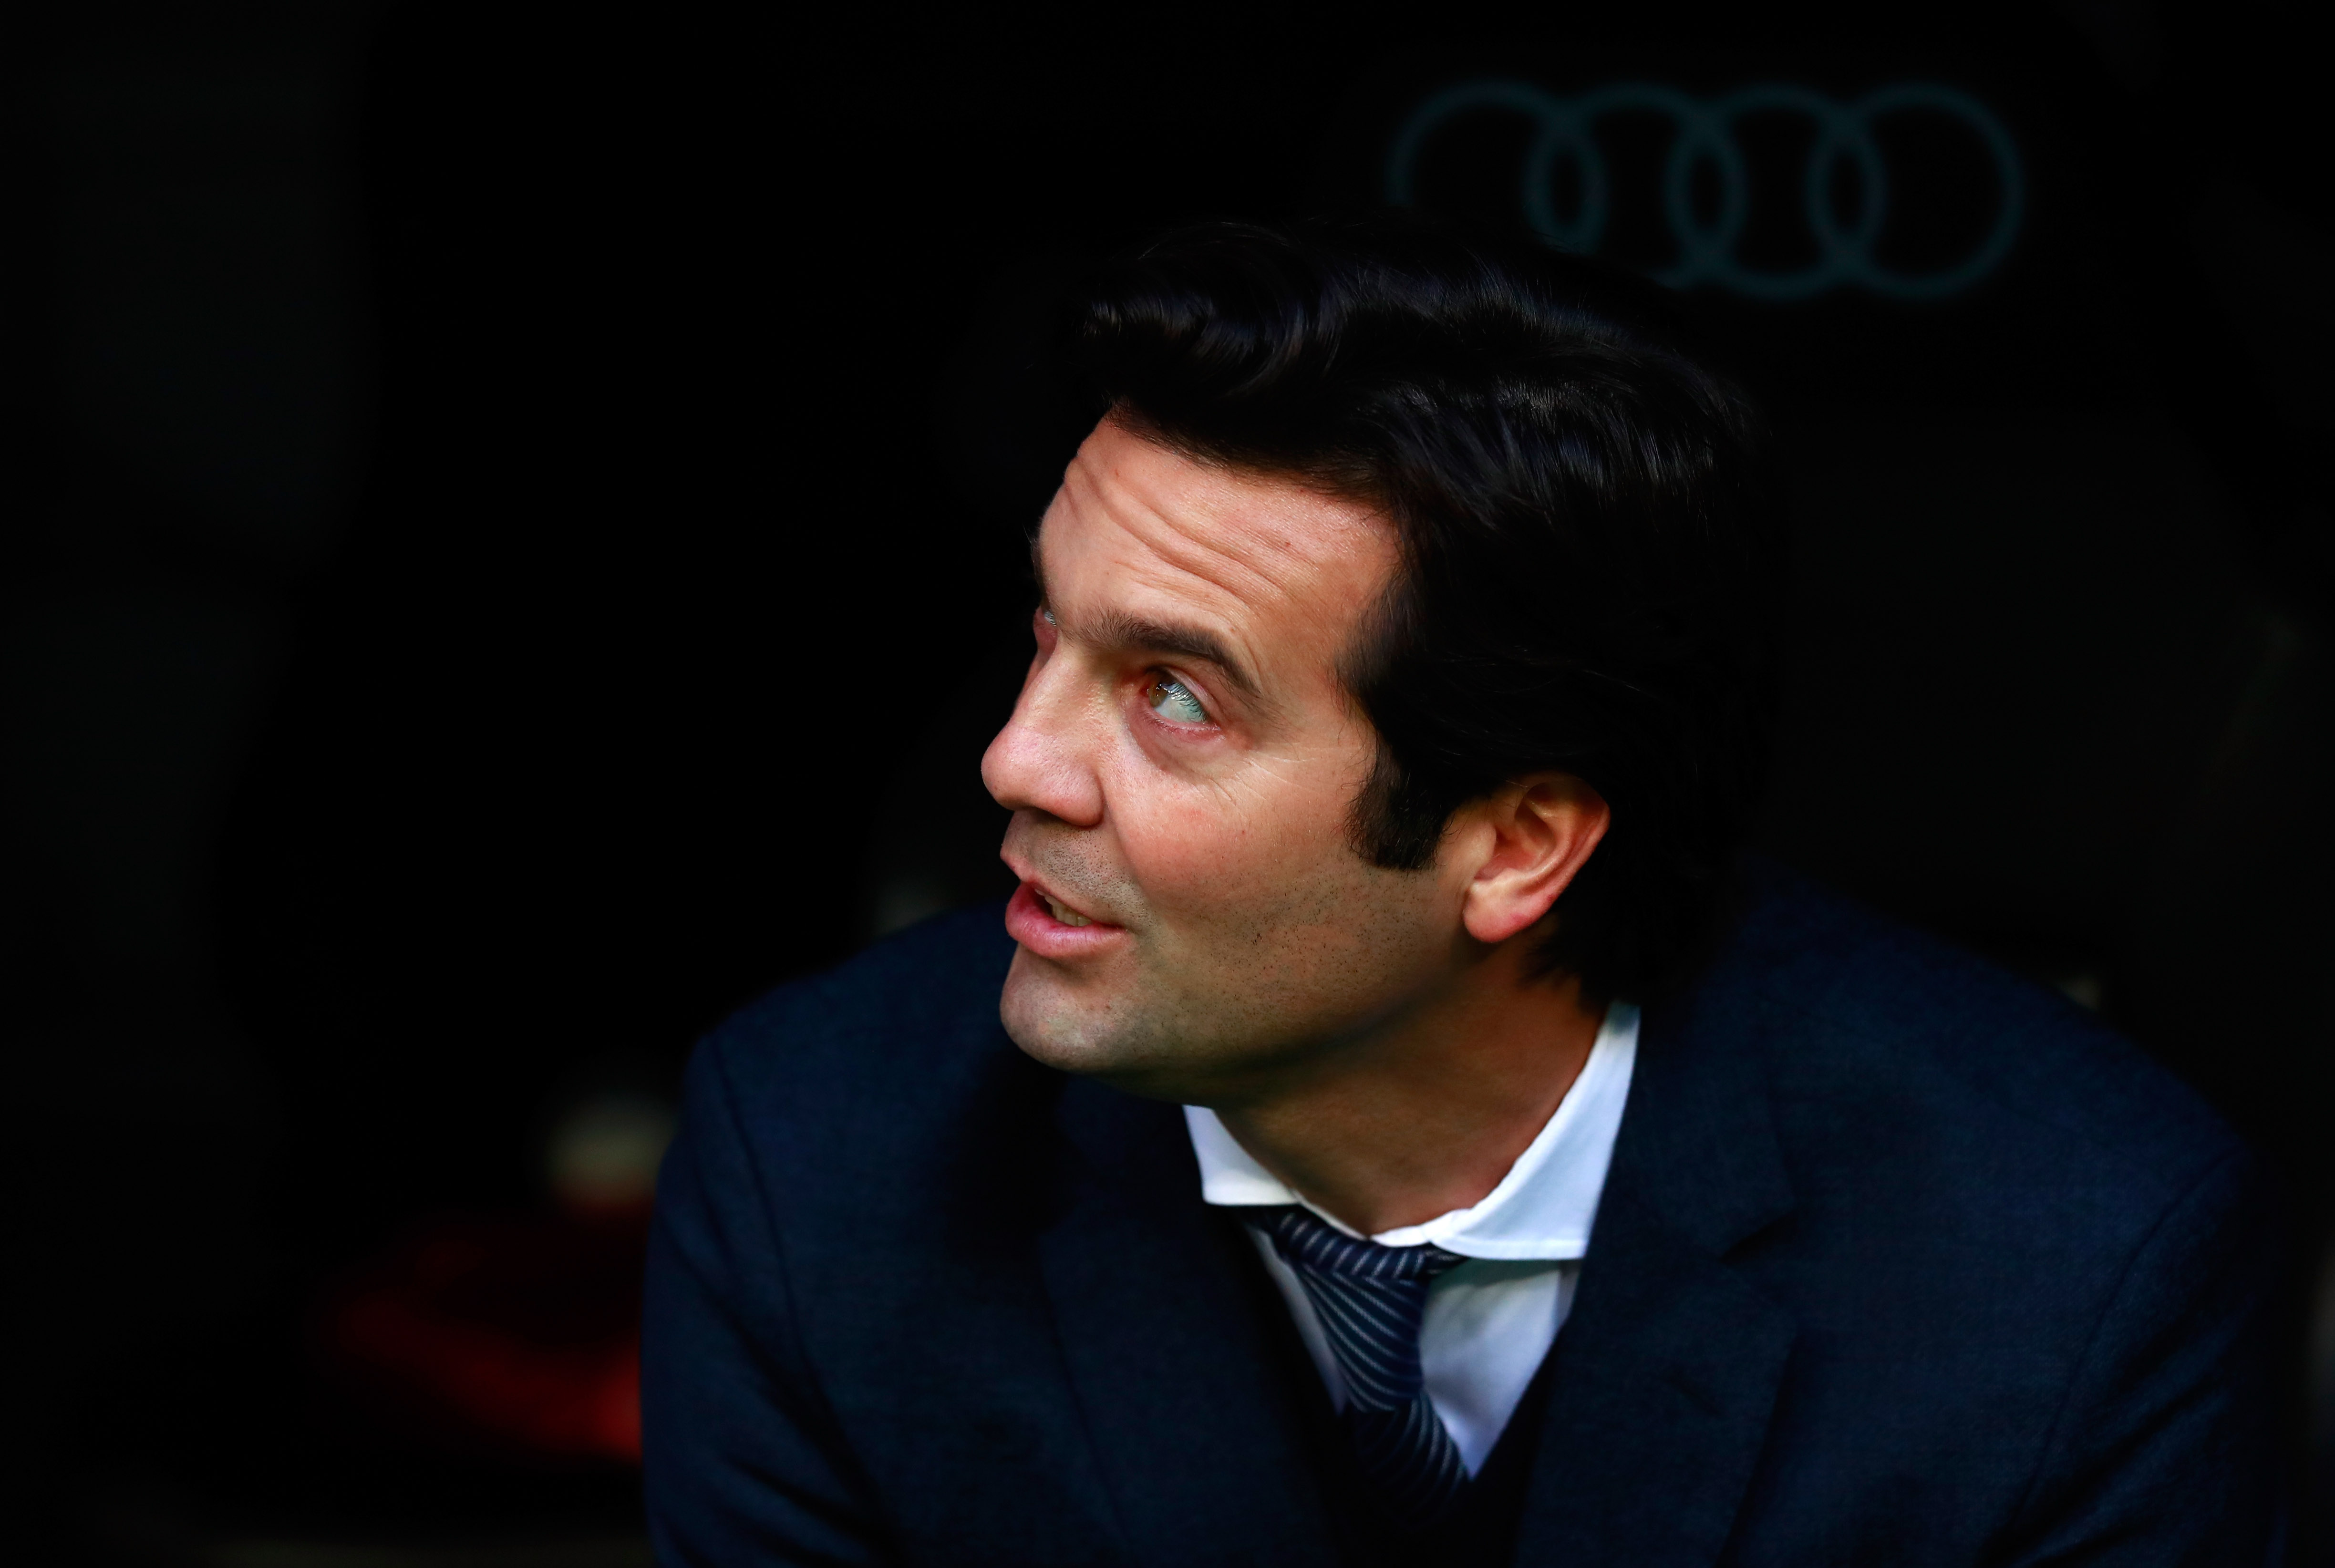 MADRID, SPAIN - DECEMBER 06:  Santiago Solari, Manager of Real Madrid looks on prior to the Copa del Rey fourth round match between Real Madrid and Melilla at Estadio Bernabeu on December 6, 2018 in Madrid, Spain.  (Photo by Gonzalo Arroyo Moreno/Getty Images)